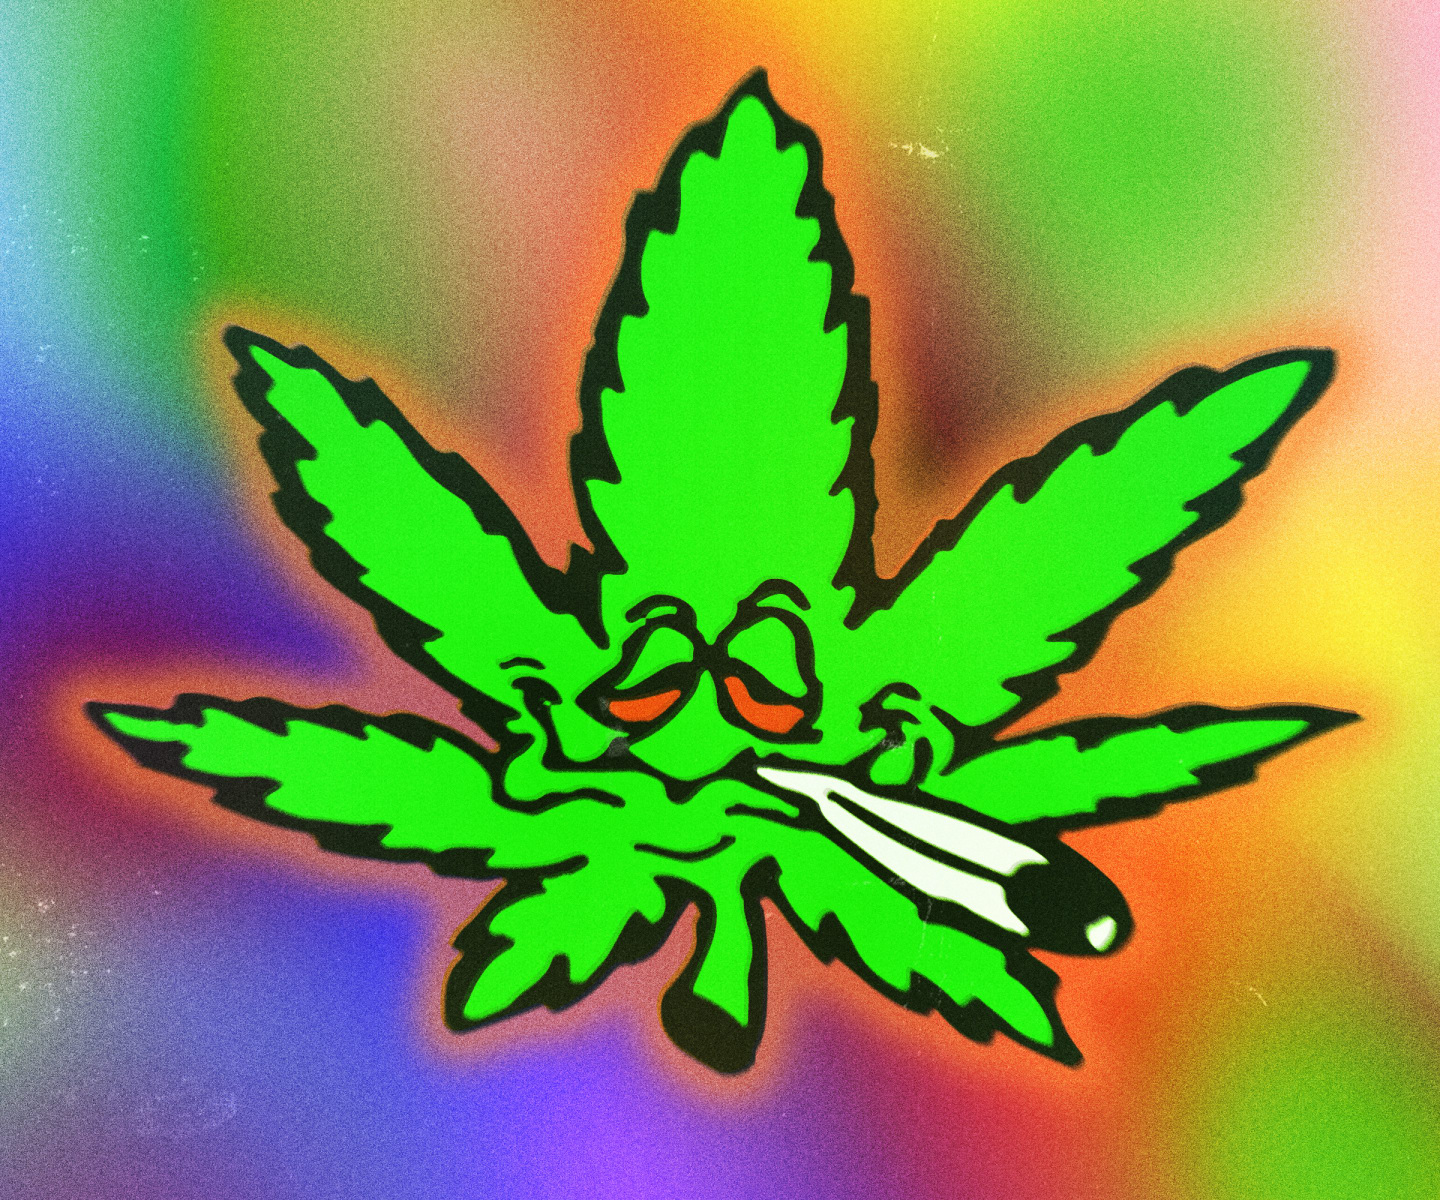 14 artists on why they love weed so much